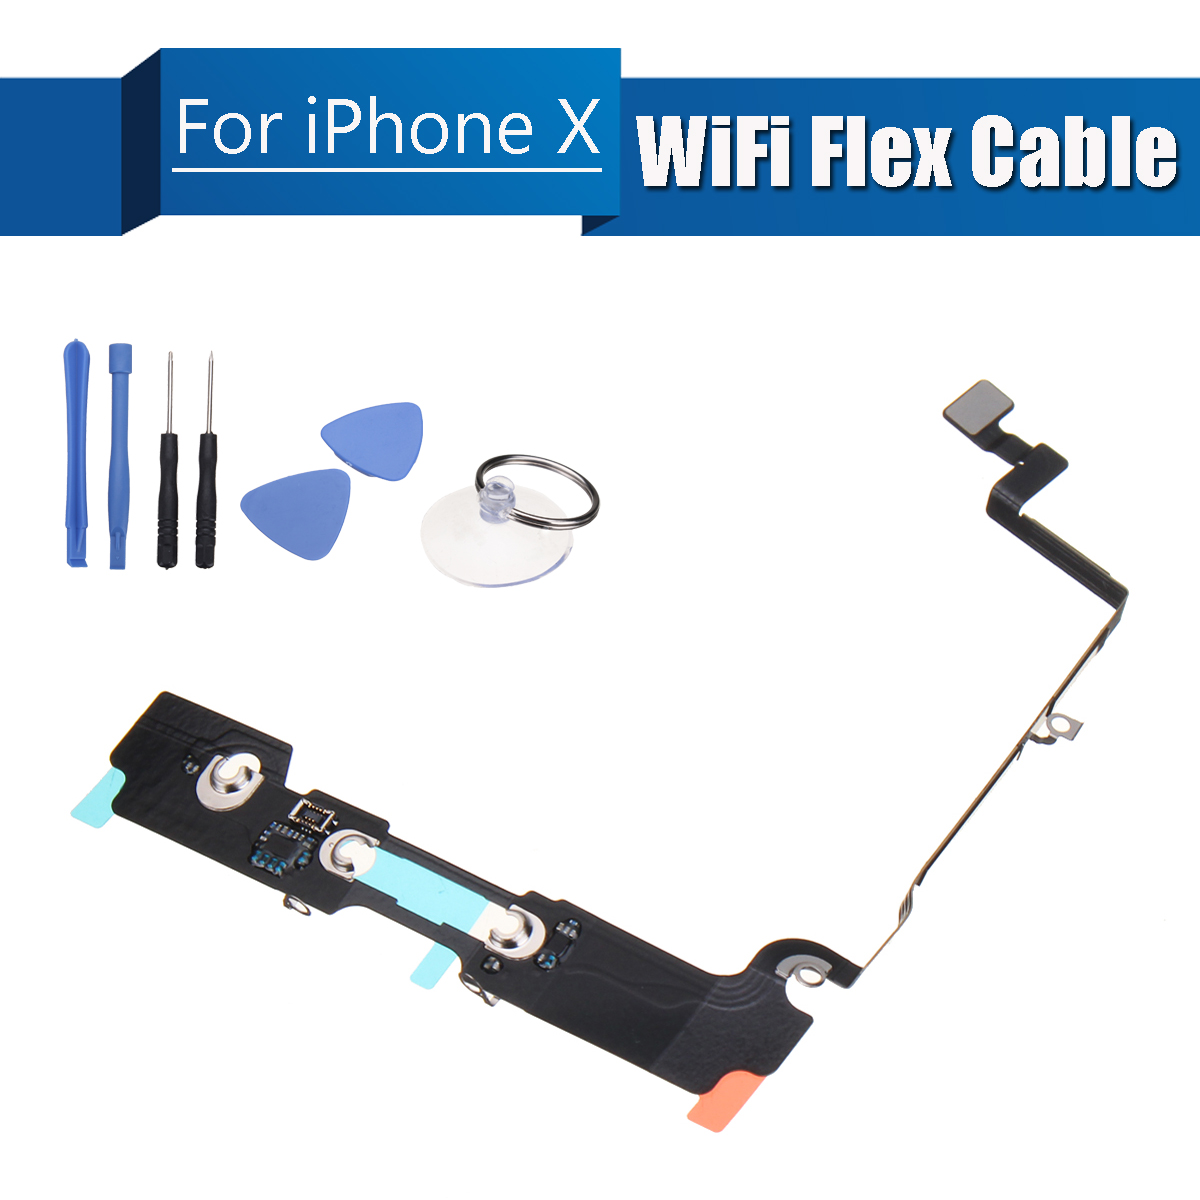 WiFi-Flex-Cable-Antenna-Signal-Accessories-with-Tools-Set-for-iPhone-X-1323913-1